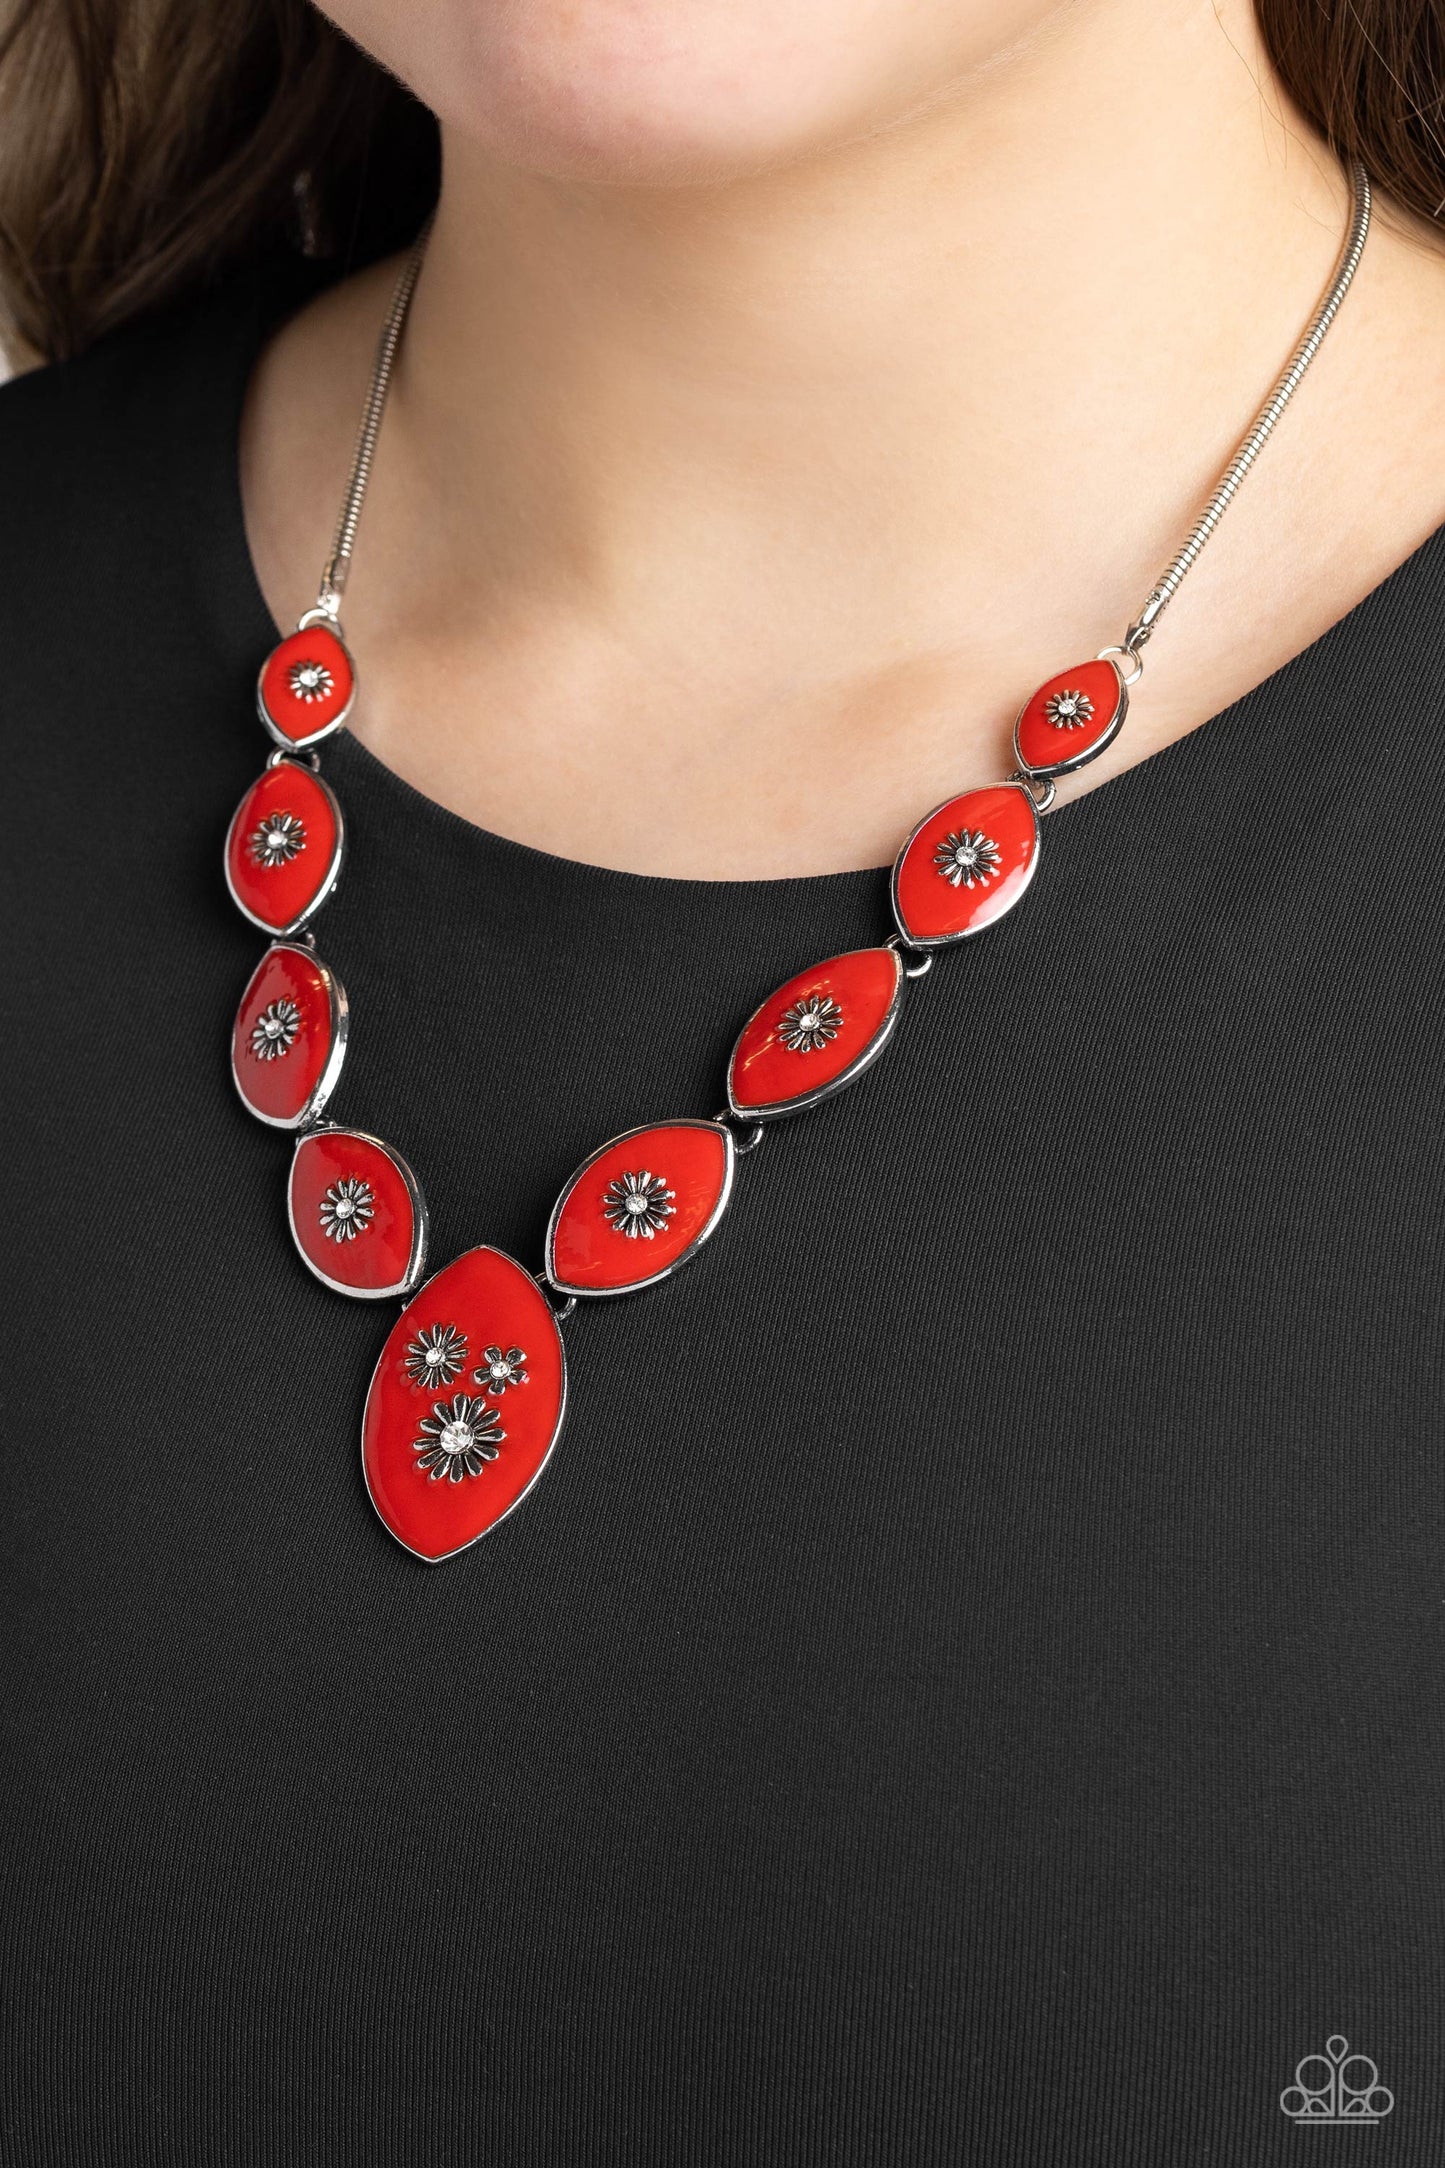 Paparazzi Accessories - Pressed Flowers - Red Necklaces featuring vibrant red paint, a collection of silver marquise-shaped frames gradually increase in size as they taper below the collar in a timeless fashion on a silver snake chain. Each frame is embossed with a delicate silver flower with a white rhinestone center, with the centermost pendant featuring three flowers, creating a glamorous array of whimsicality. Features an adjustable clasp closure. 